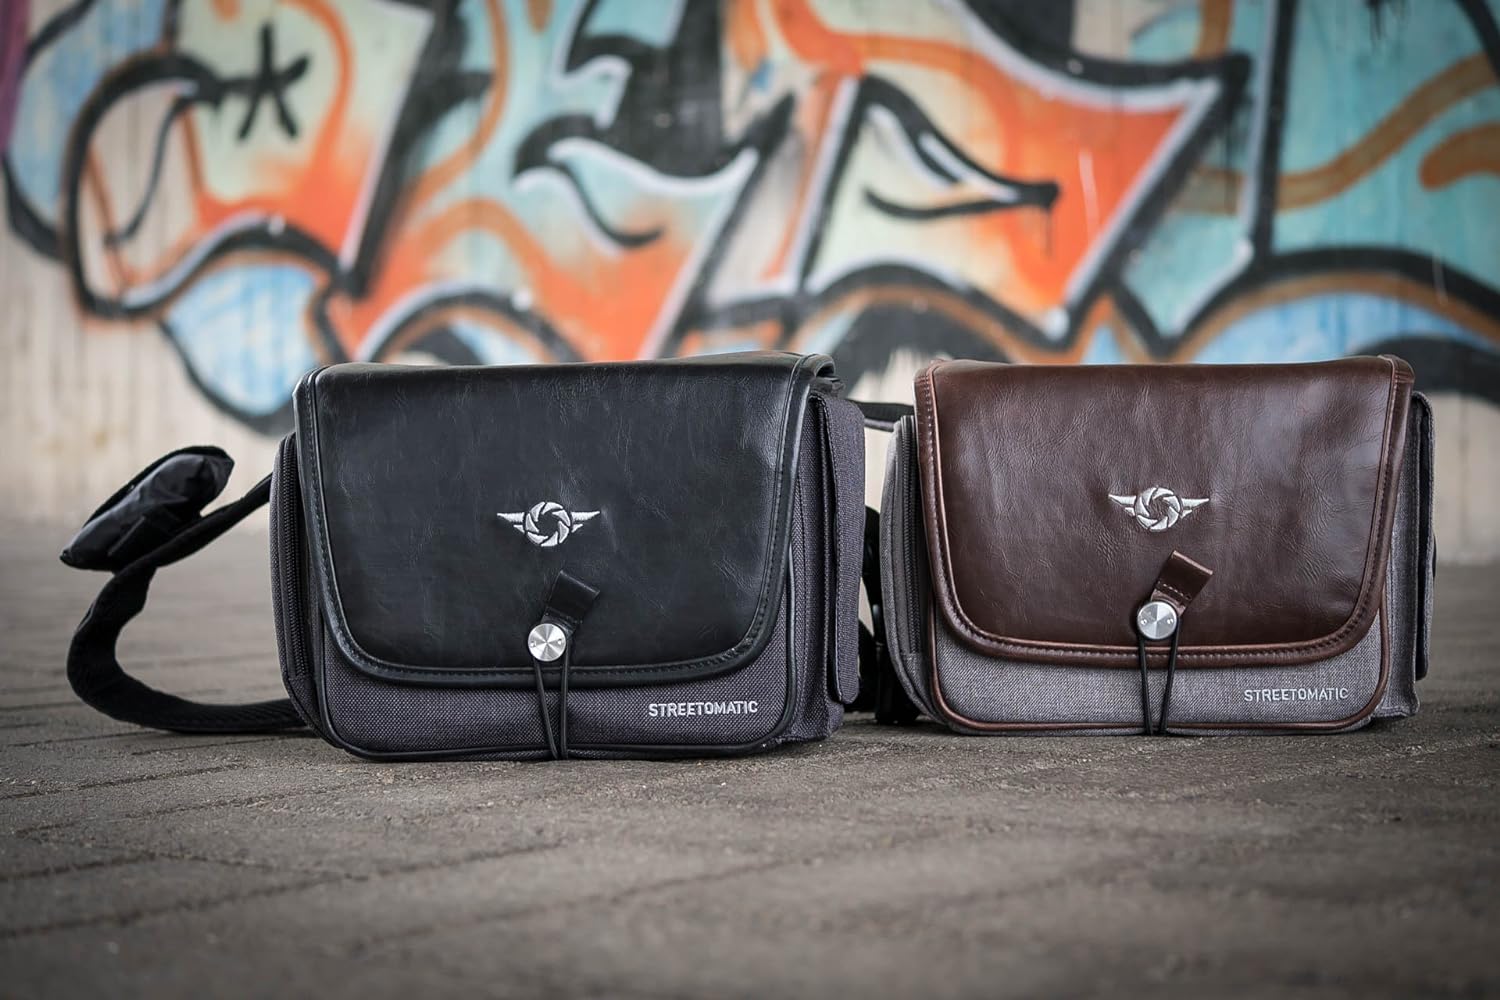 CAMSLINGER Streetomatic+ camera bag for mirrorless cameras, DSLRs and Superzooms (two colours)